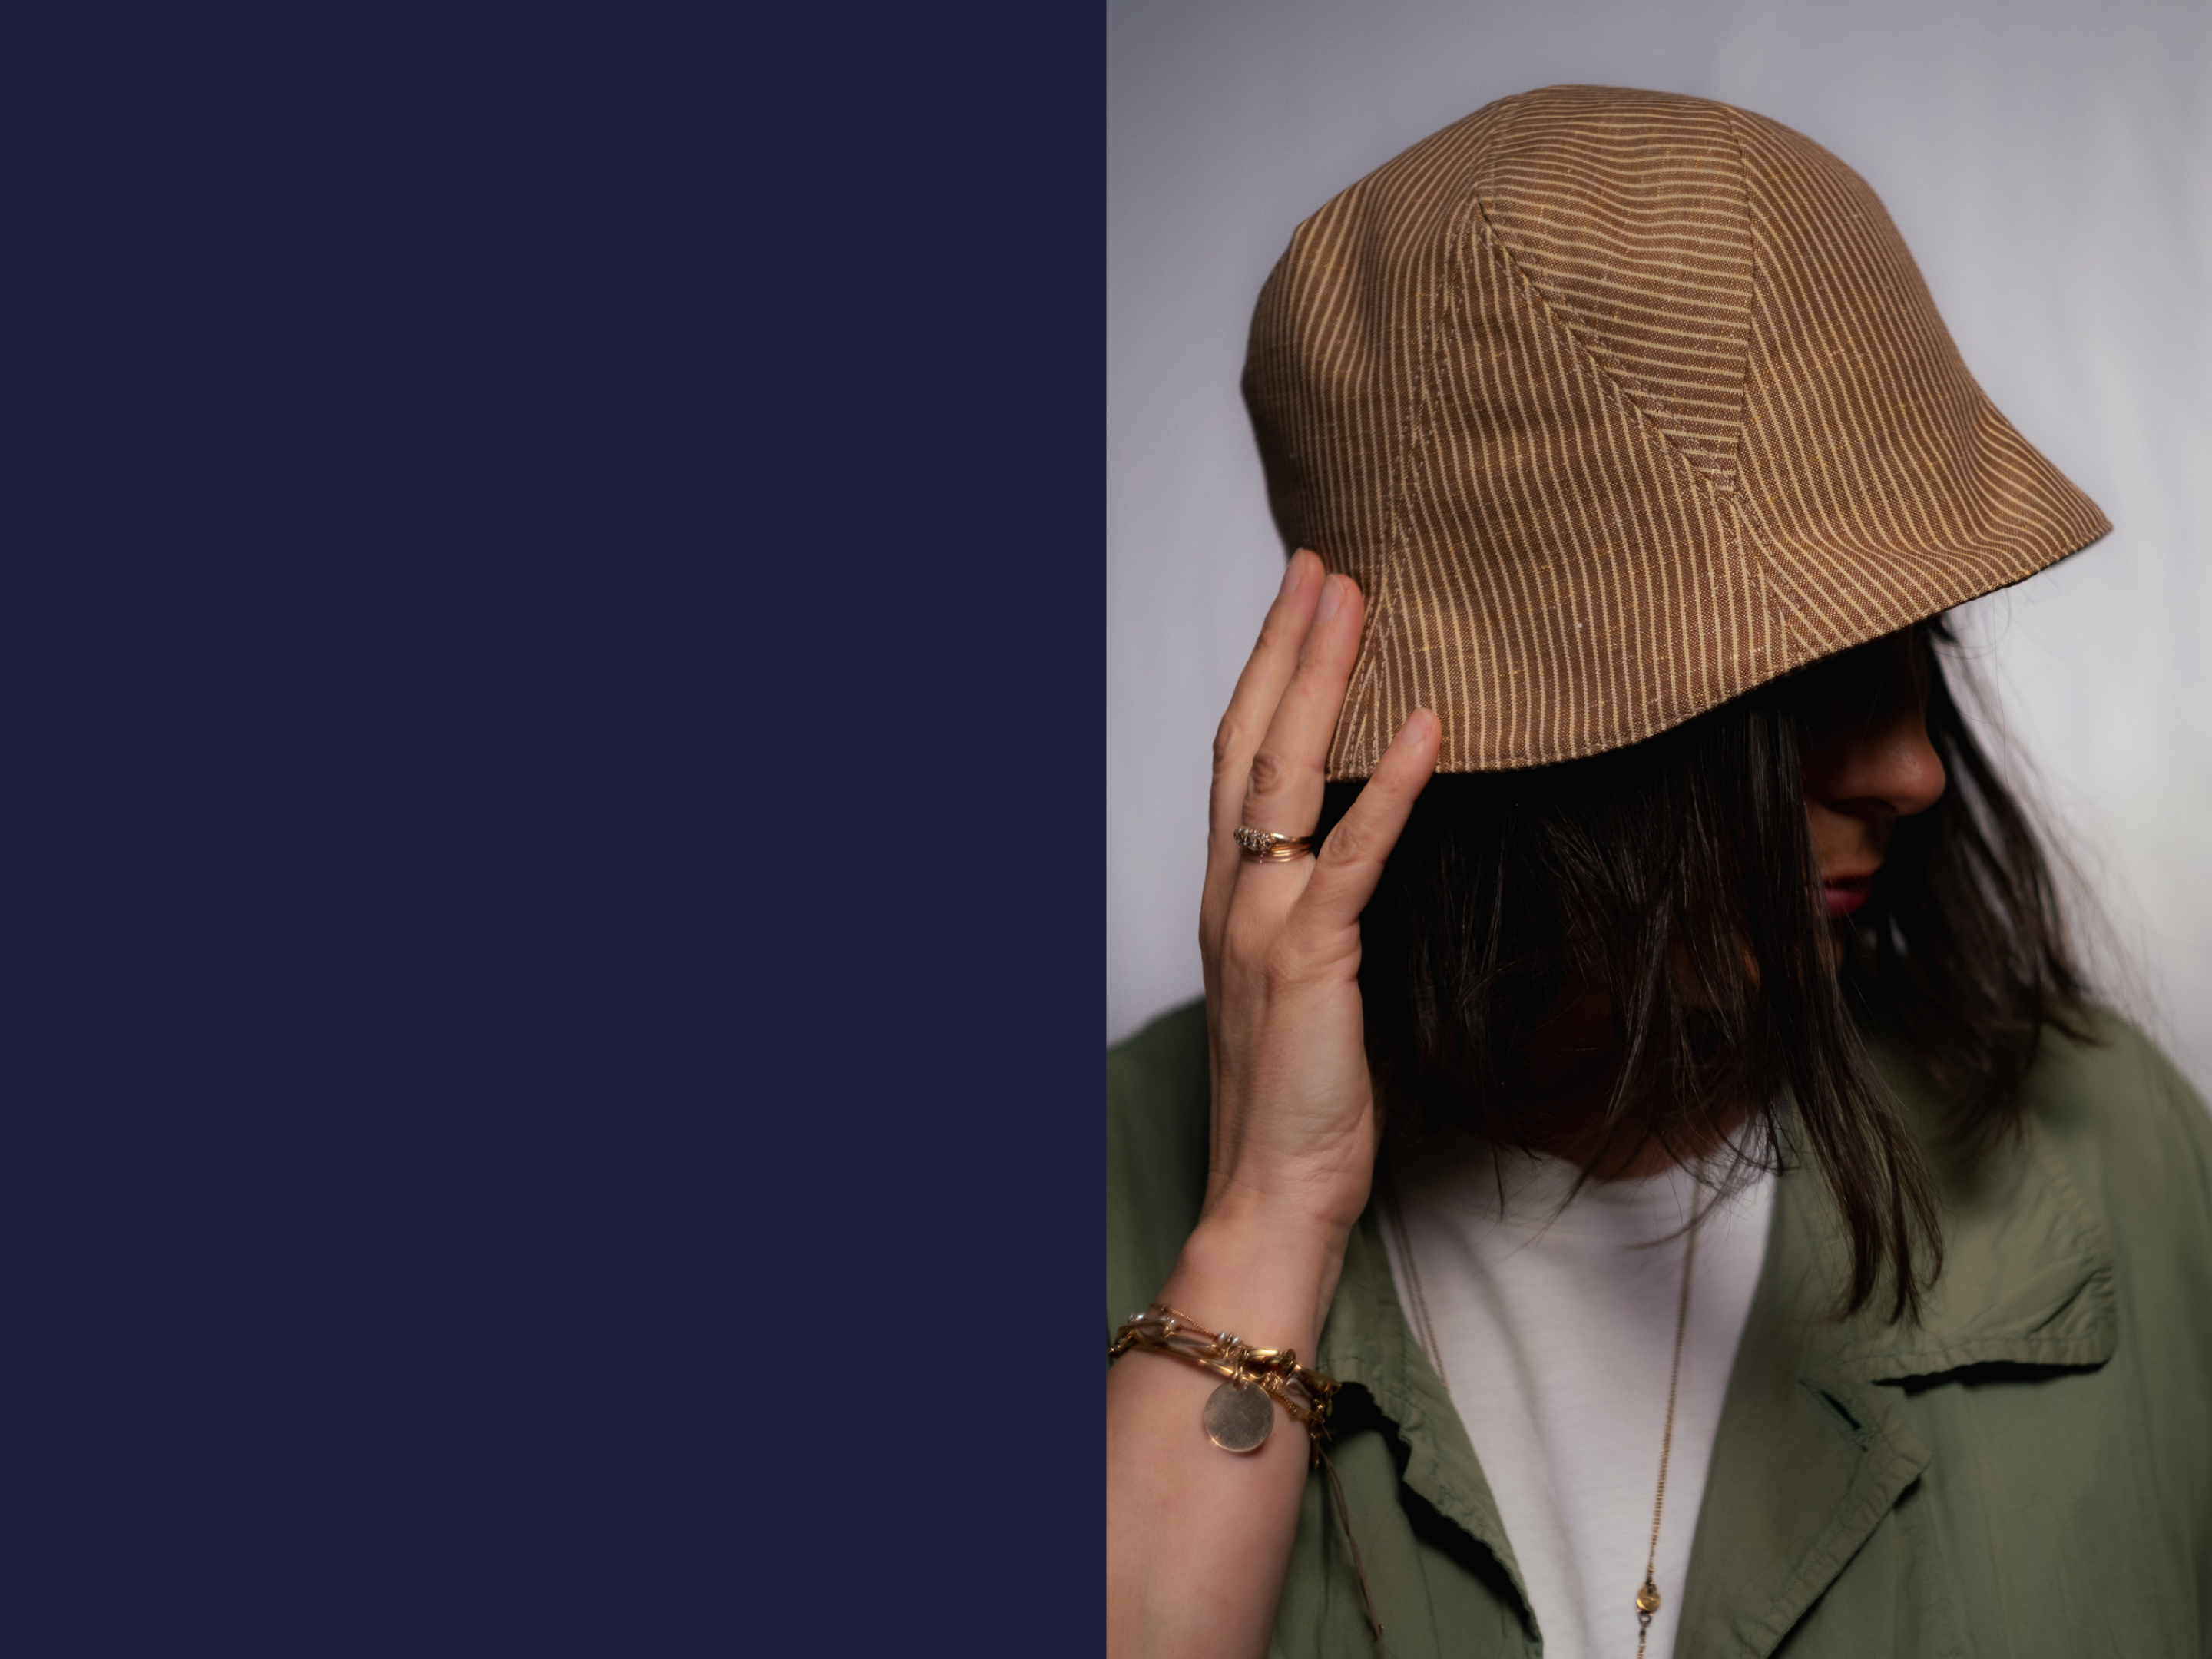 Juliette is wearing a Le Panache Paris© bucket hat made in France with tobacco and ivory stripeweave100% cotton.